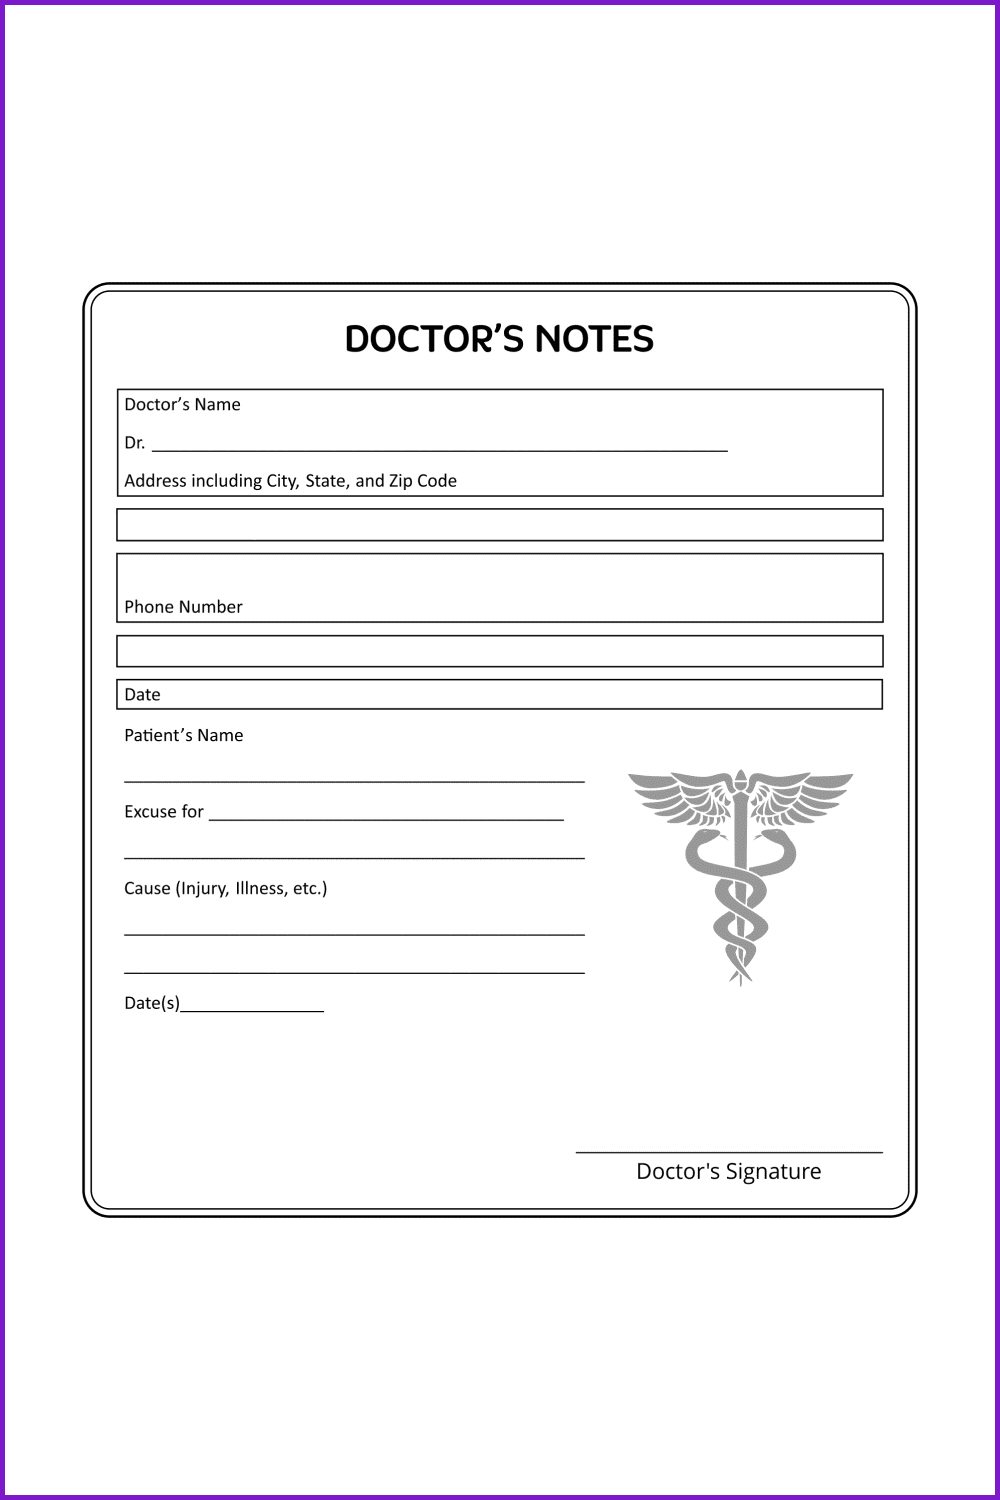 Printable Doctor’s Note Template For School.